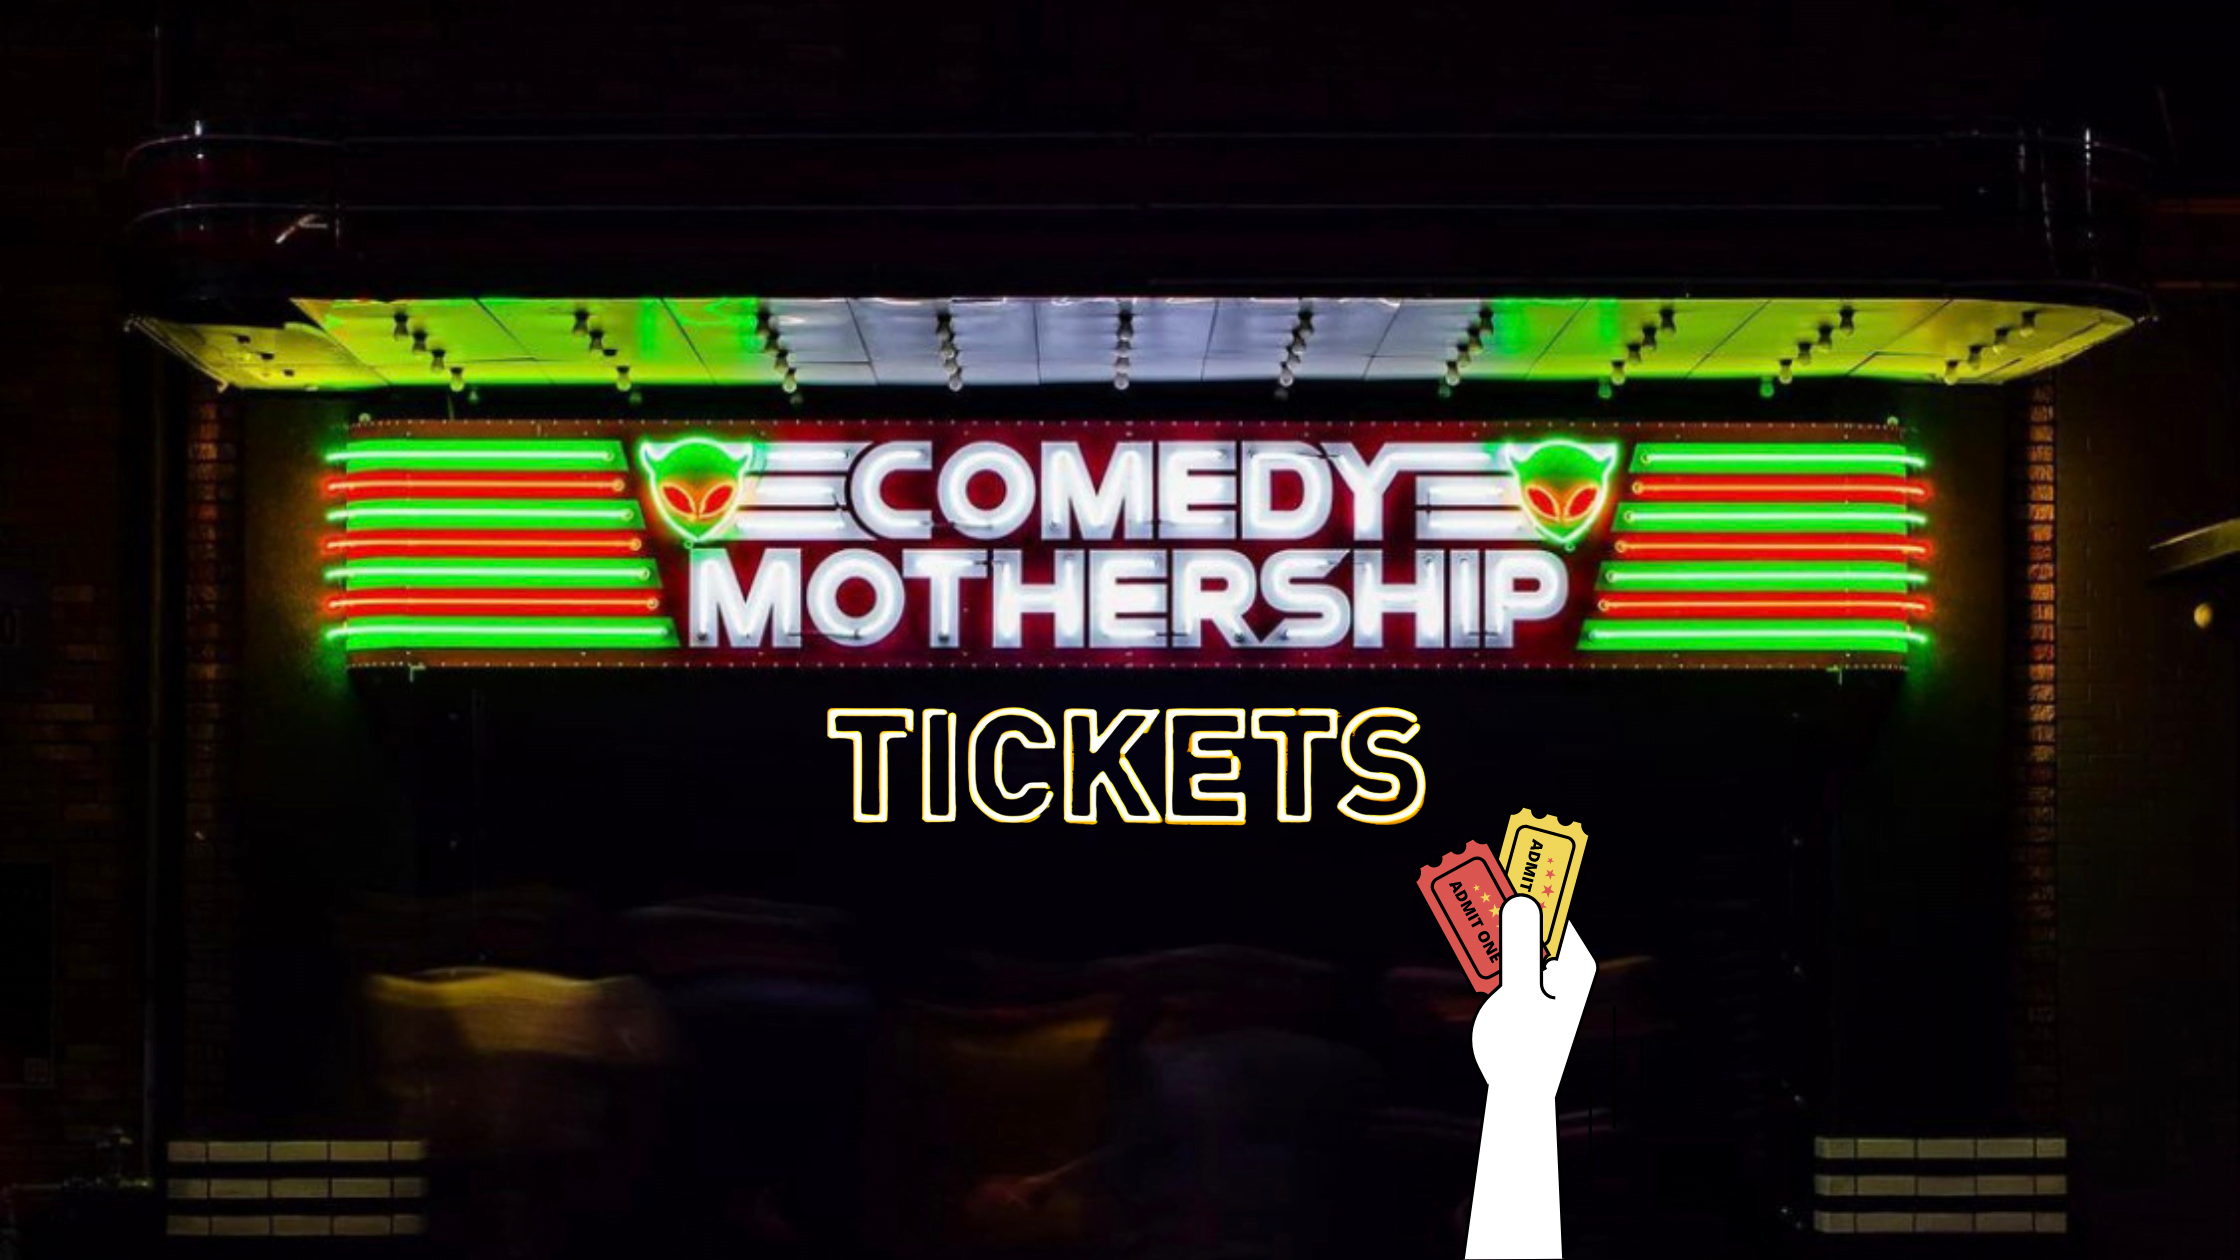 Comedy Mothership Tickets